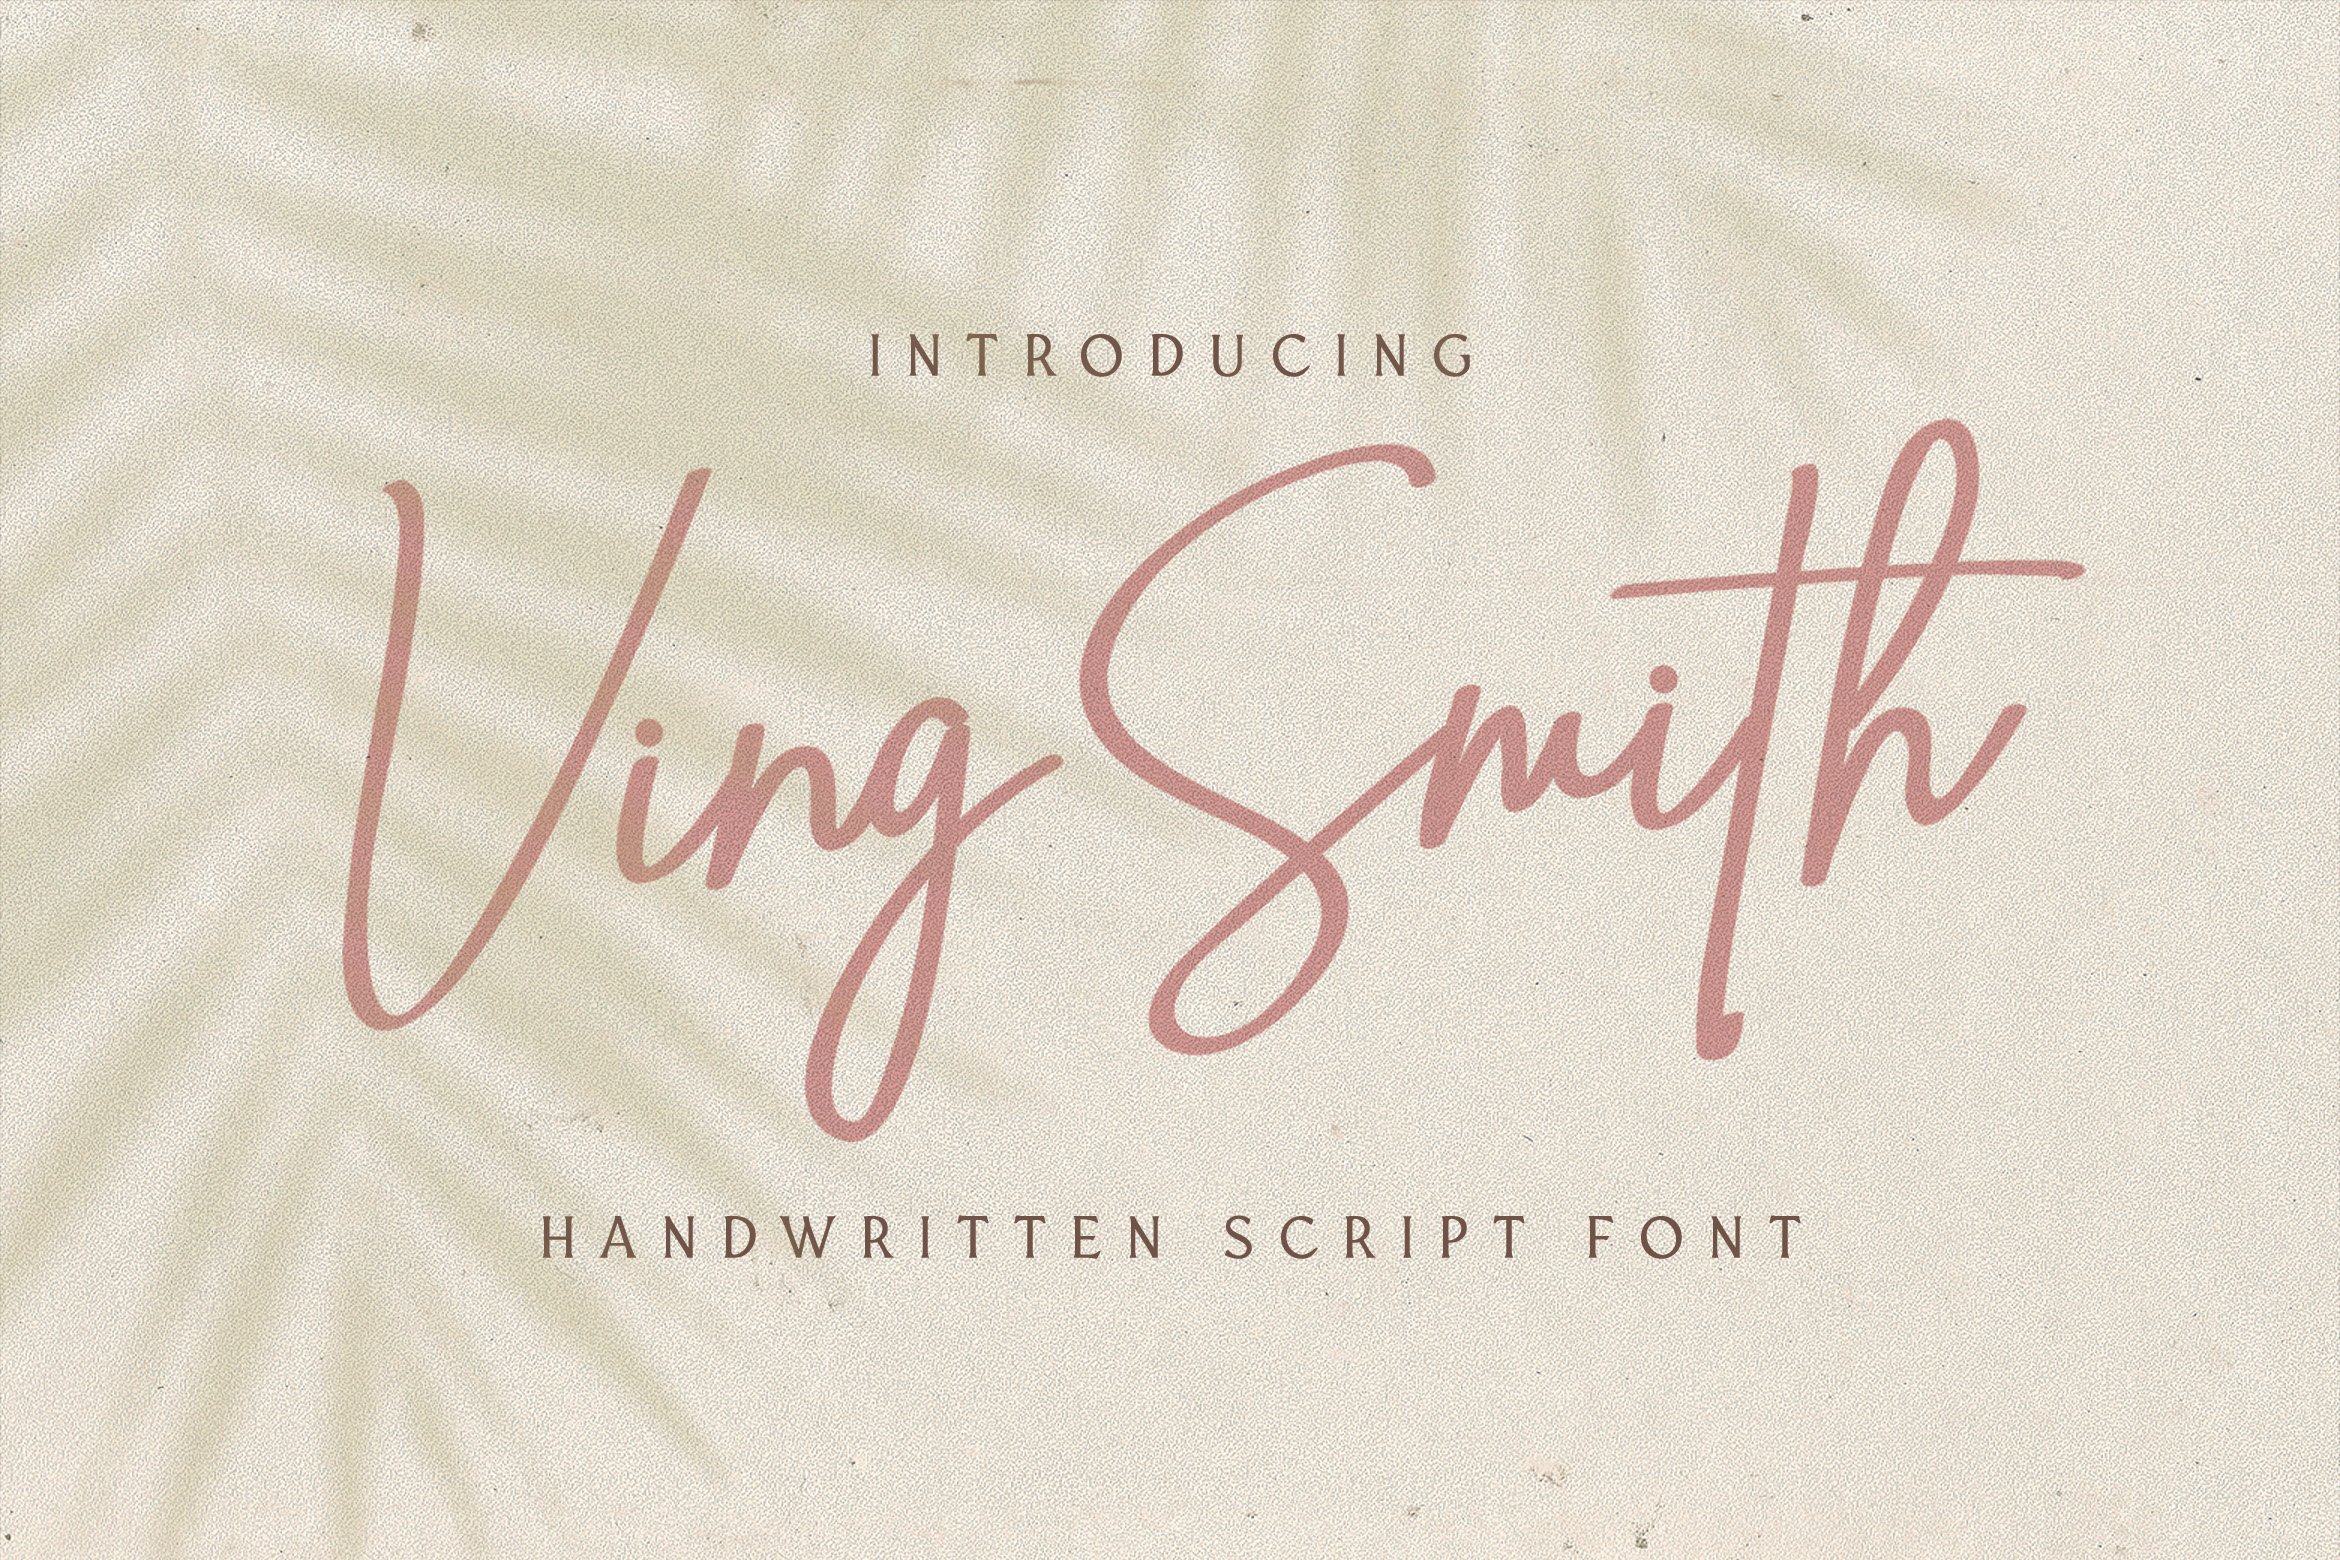 Ving Smith - Handwritten Font cover image.